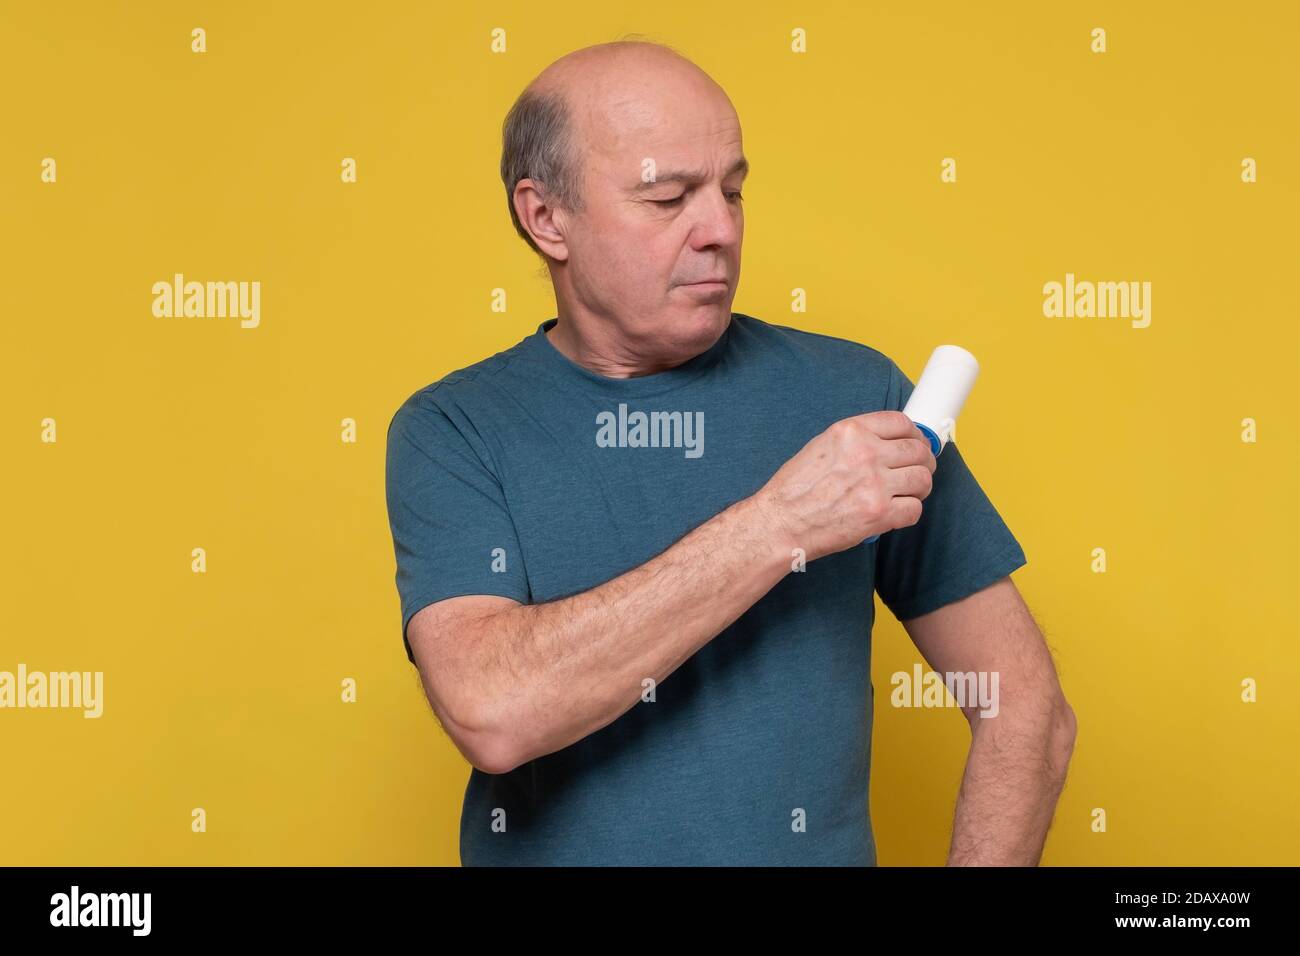 Senior caucasian man holding a hair removal roller cleaning his clothes. Stock Photo